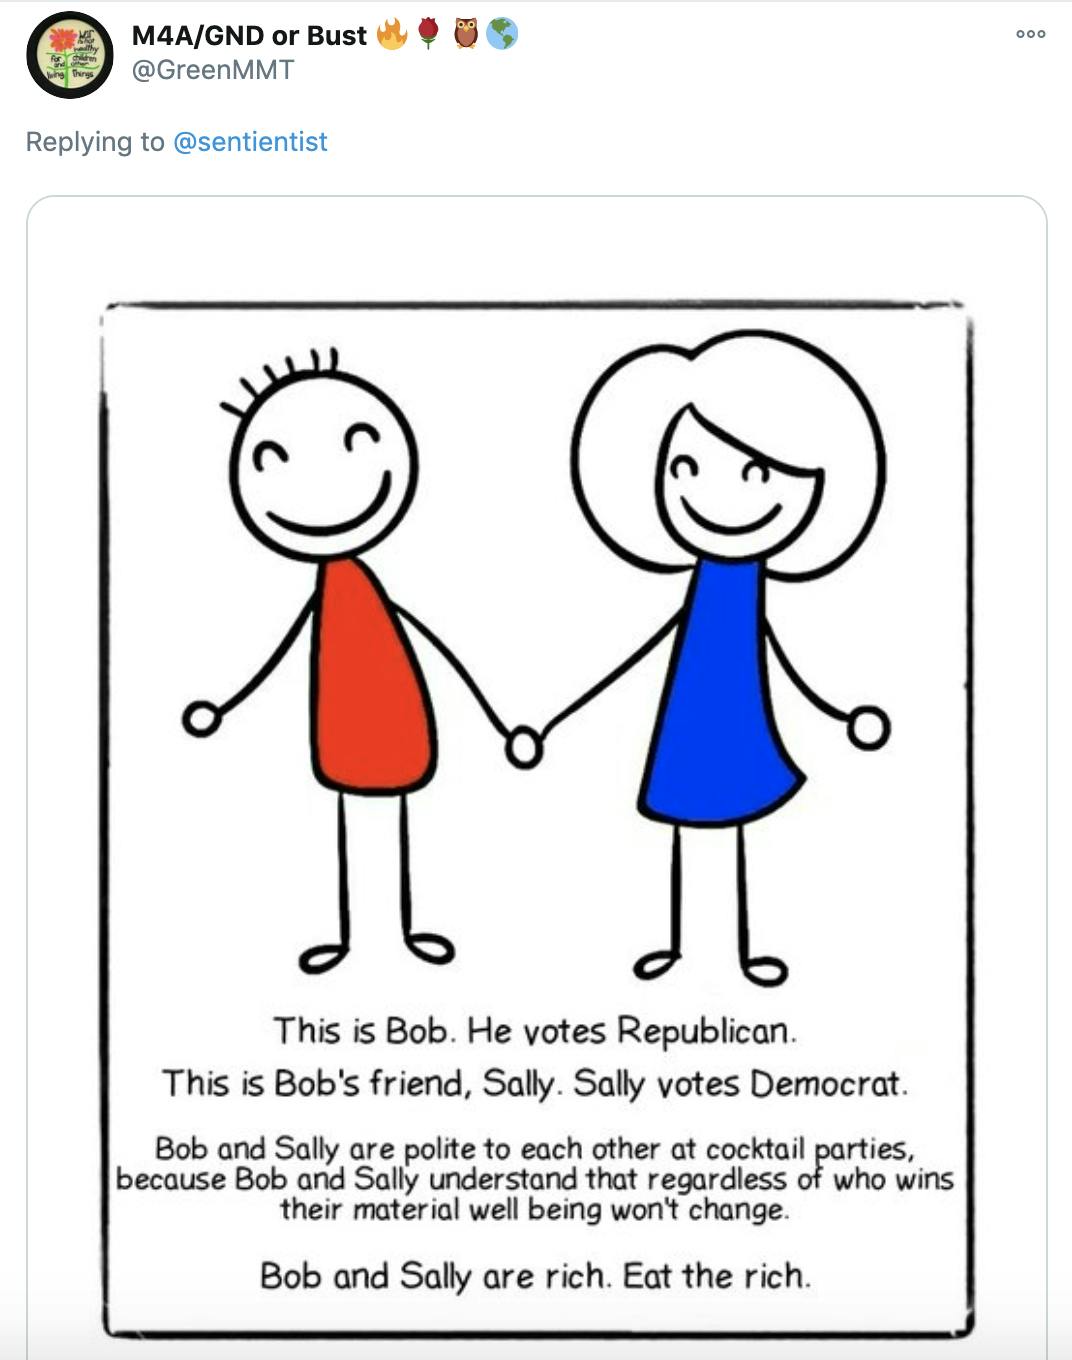 Picture of two stick figures, a man in a red top and a woman in a blue top with text meant to look handwritten that says 'This is Bob. He voted Republican. This is Bob's friend, Sally. Sally votes democrat. Bob and Sally are polite to each other at cocktail parties because Bob and Sally understand that regardless of who wins their material well being won't change. Bob and Sally are rich. Eat the rich.'